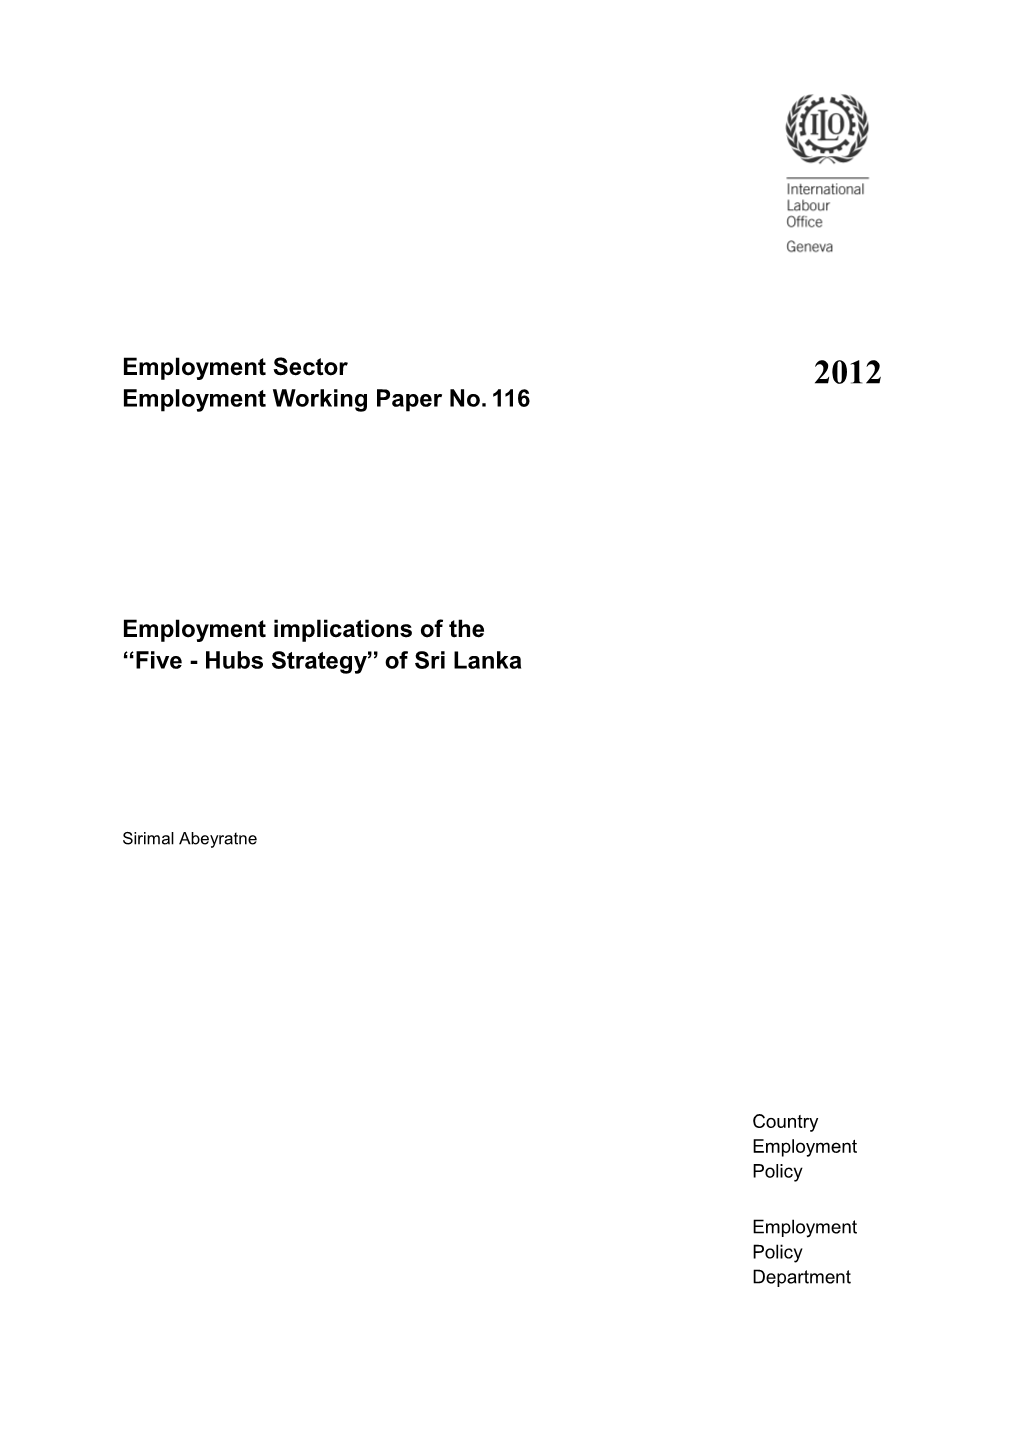 Employment Implications of the "Five